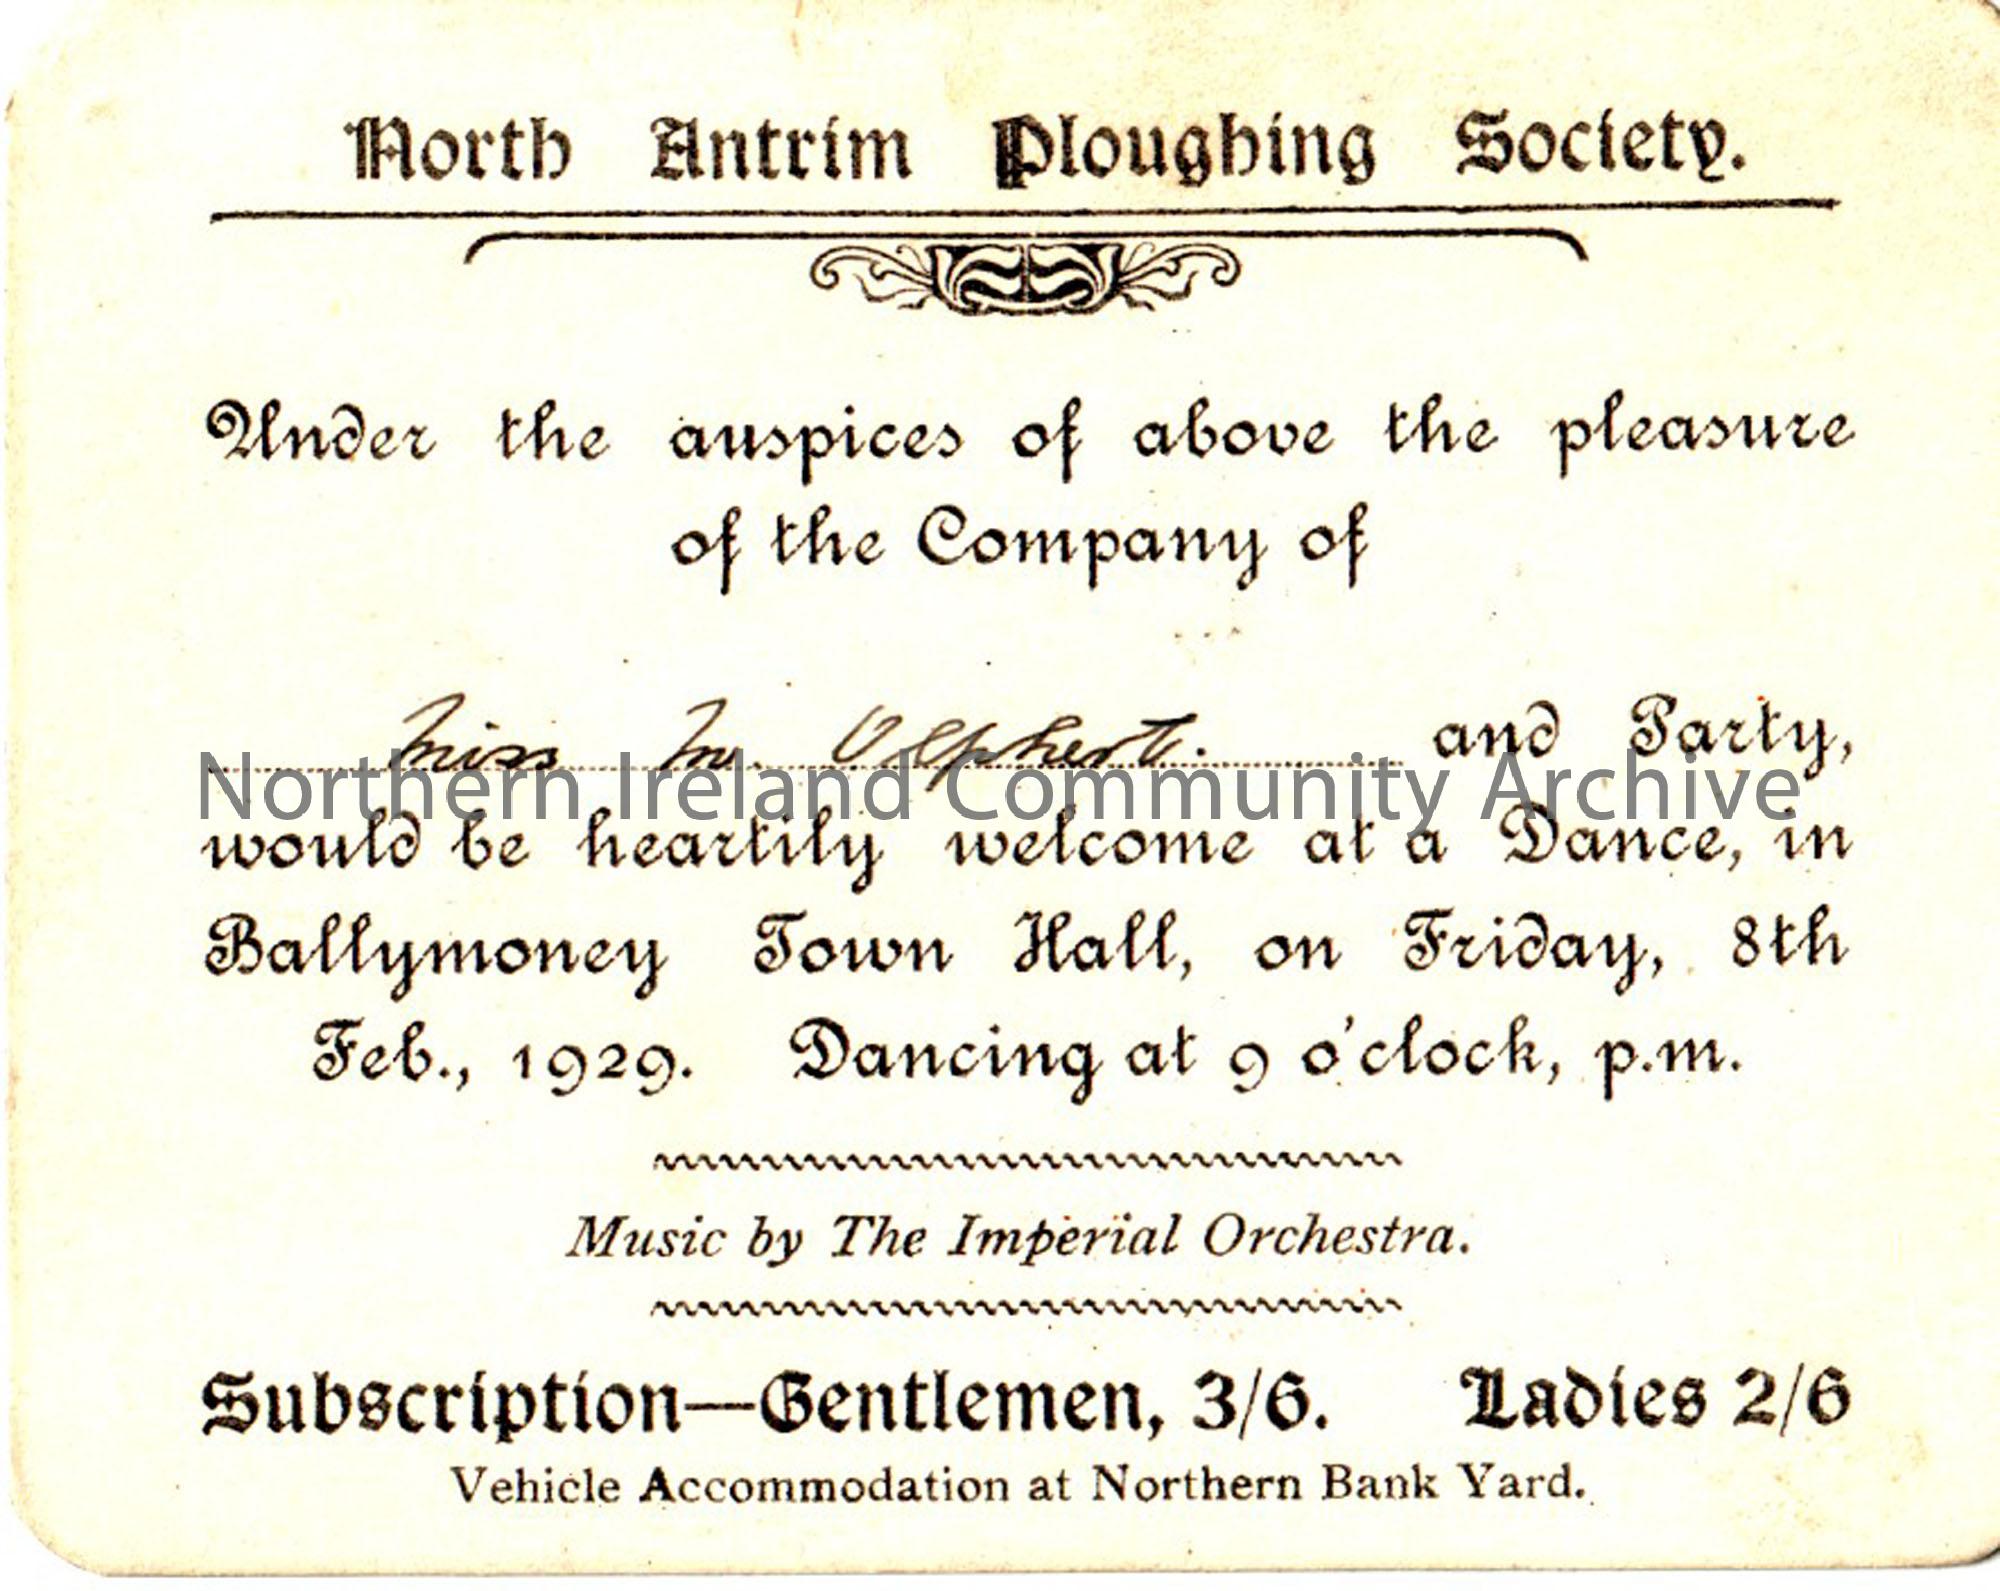 Invitation from the North Antrim Ploughing Society to Miss M. Olphert, to attend a dance in Ballymoney Town Hall on Friday, 8th February 1929